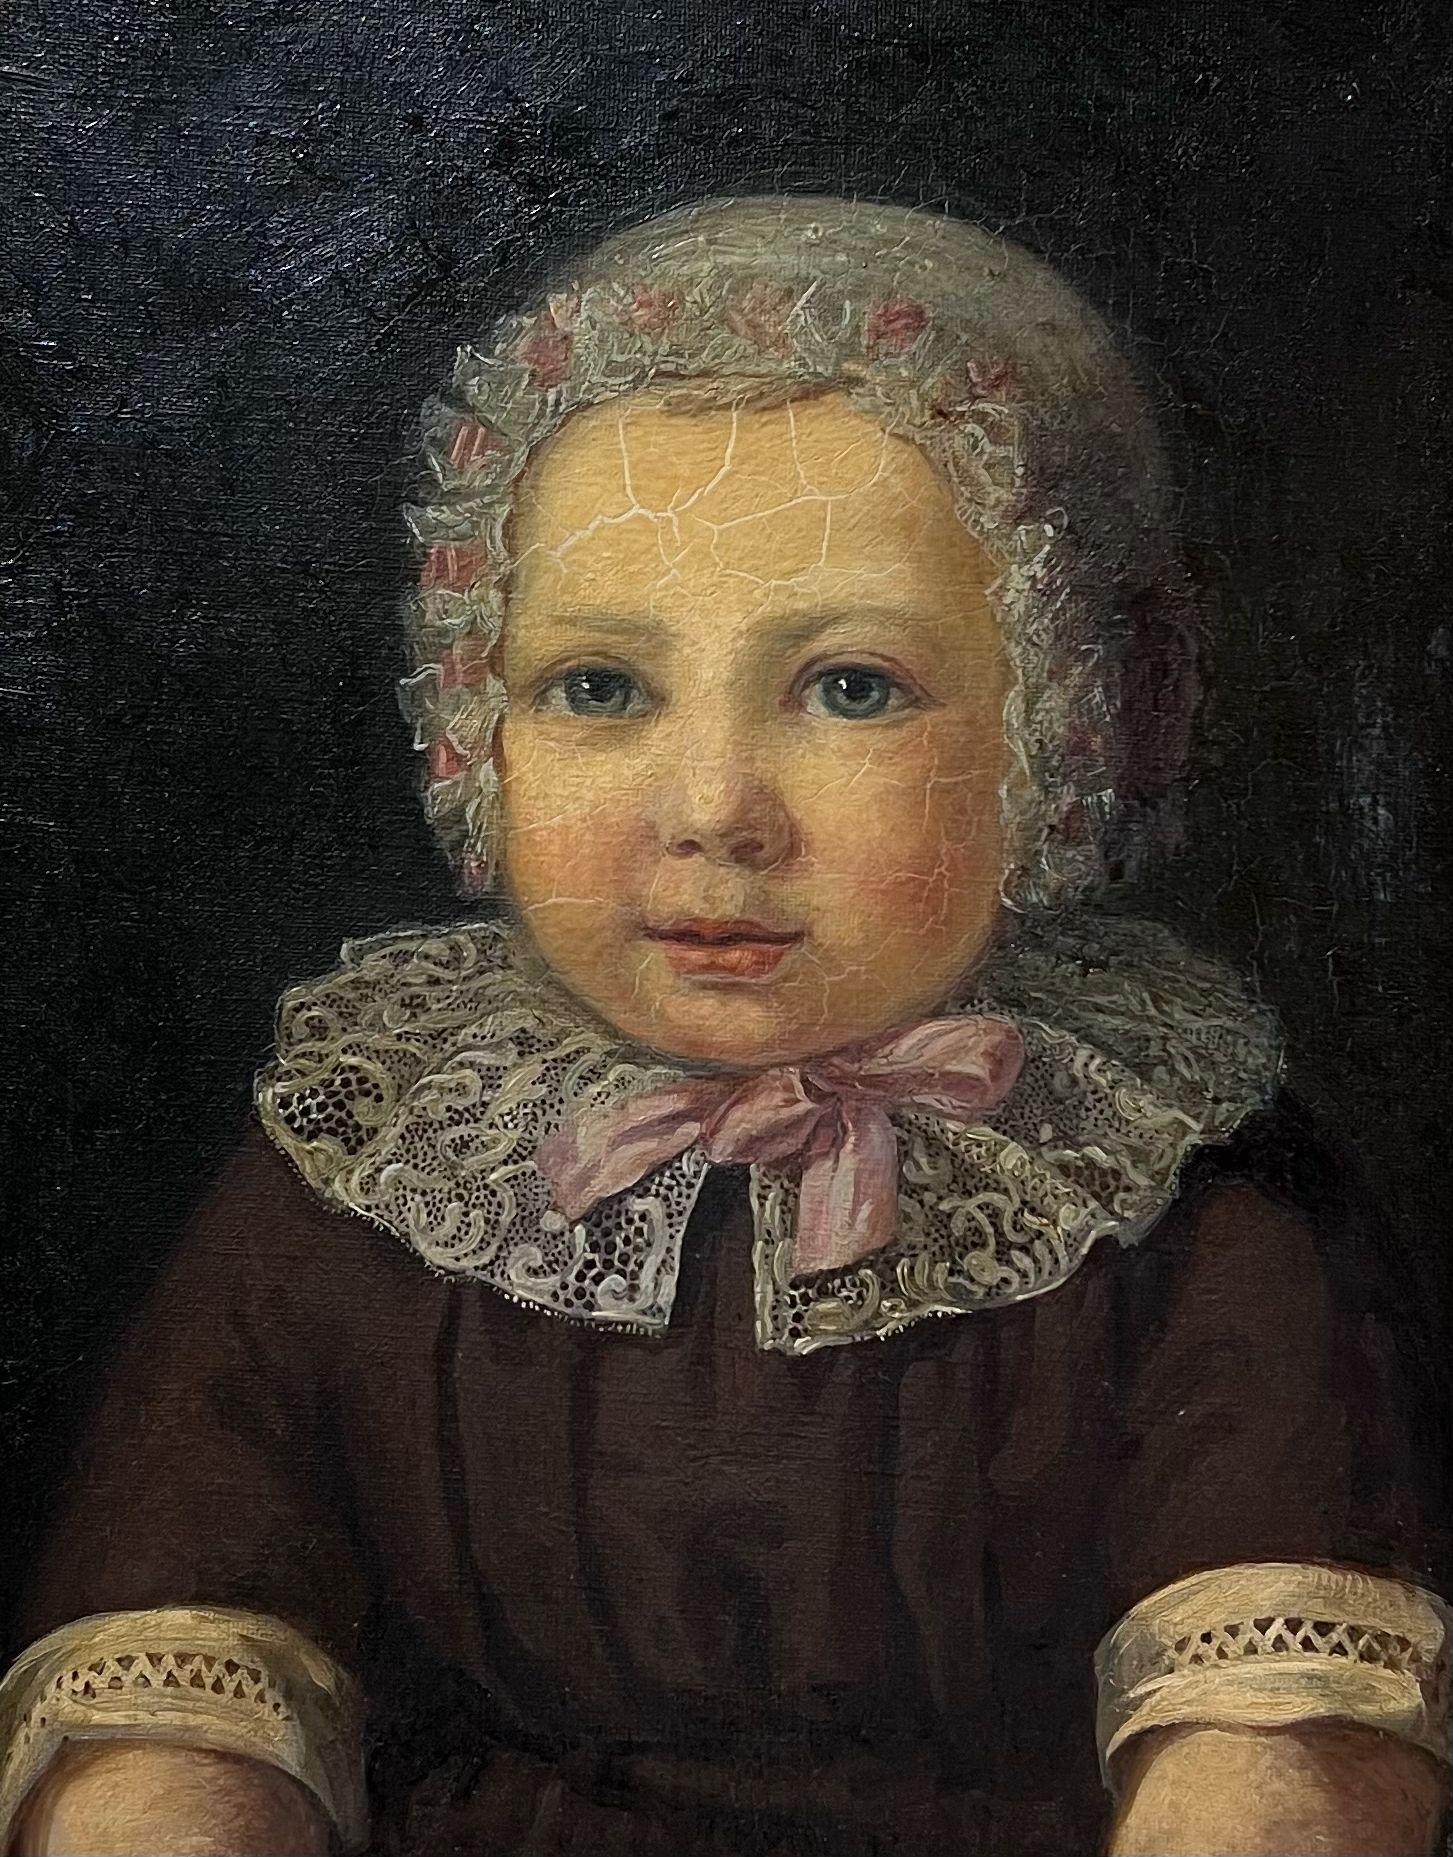 Portrait of a Child
European School, early 20th century
oil on canvas, framed
frame: 21 x 18 inches
canvas: 15 x 12 inches
provenance: private collection, England
condition: extensive crackling and glazing to the paint but in good and sound